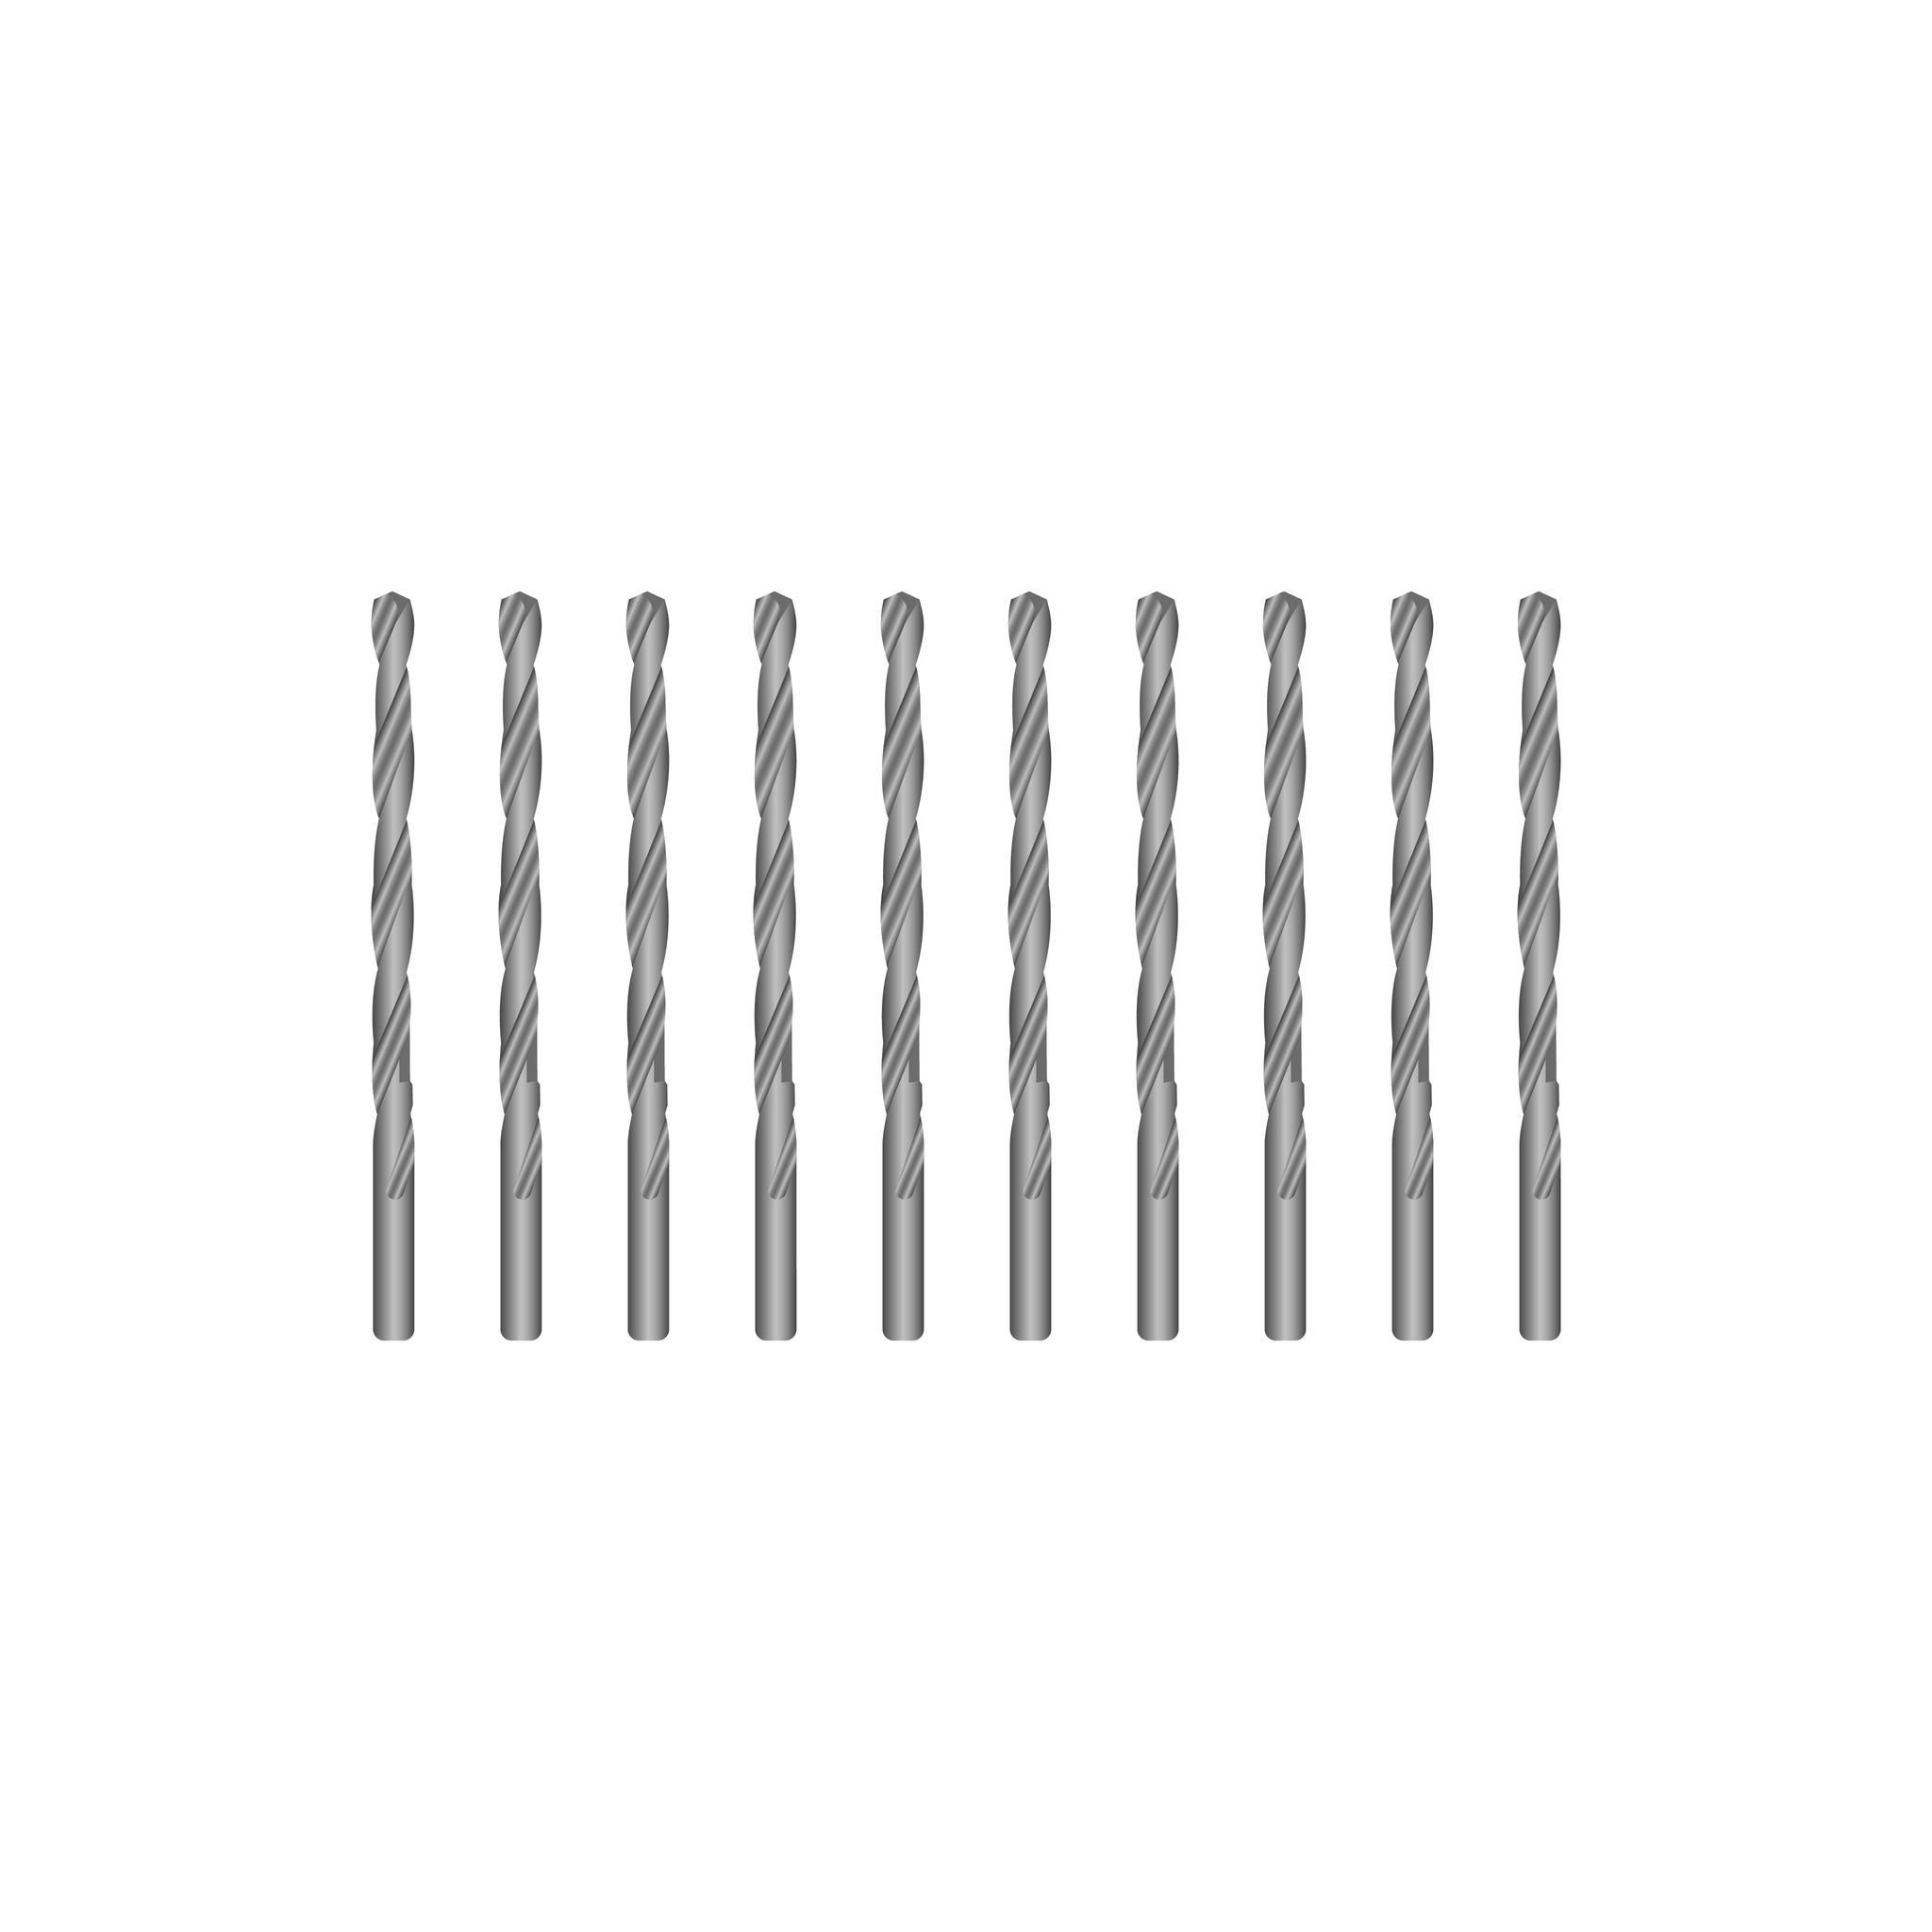 10 silver metal drills displayed in a line.